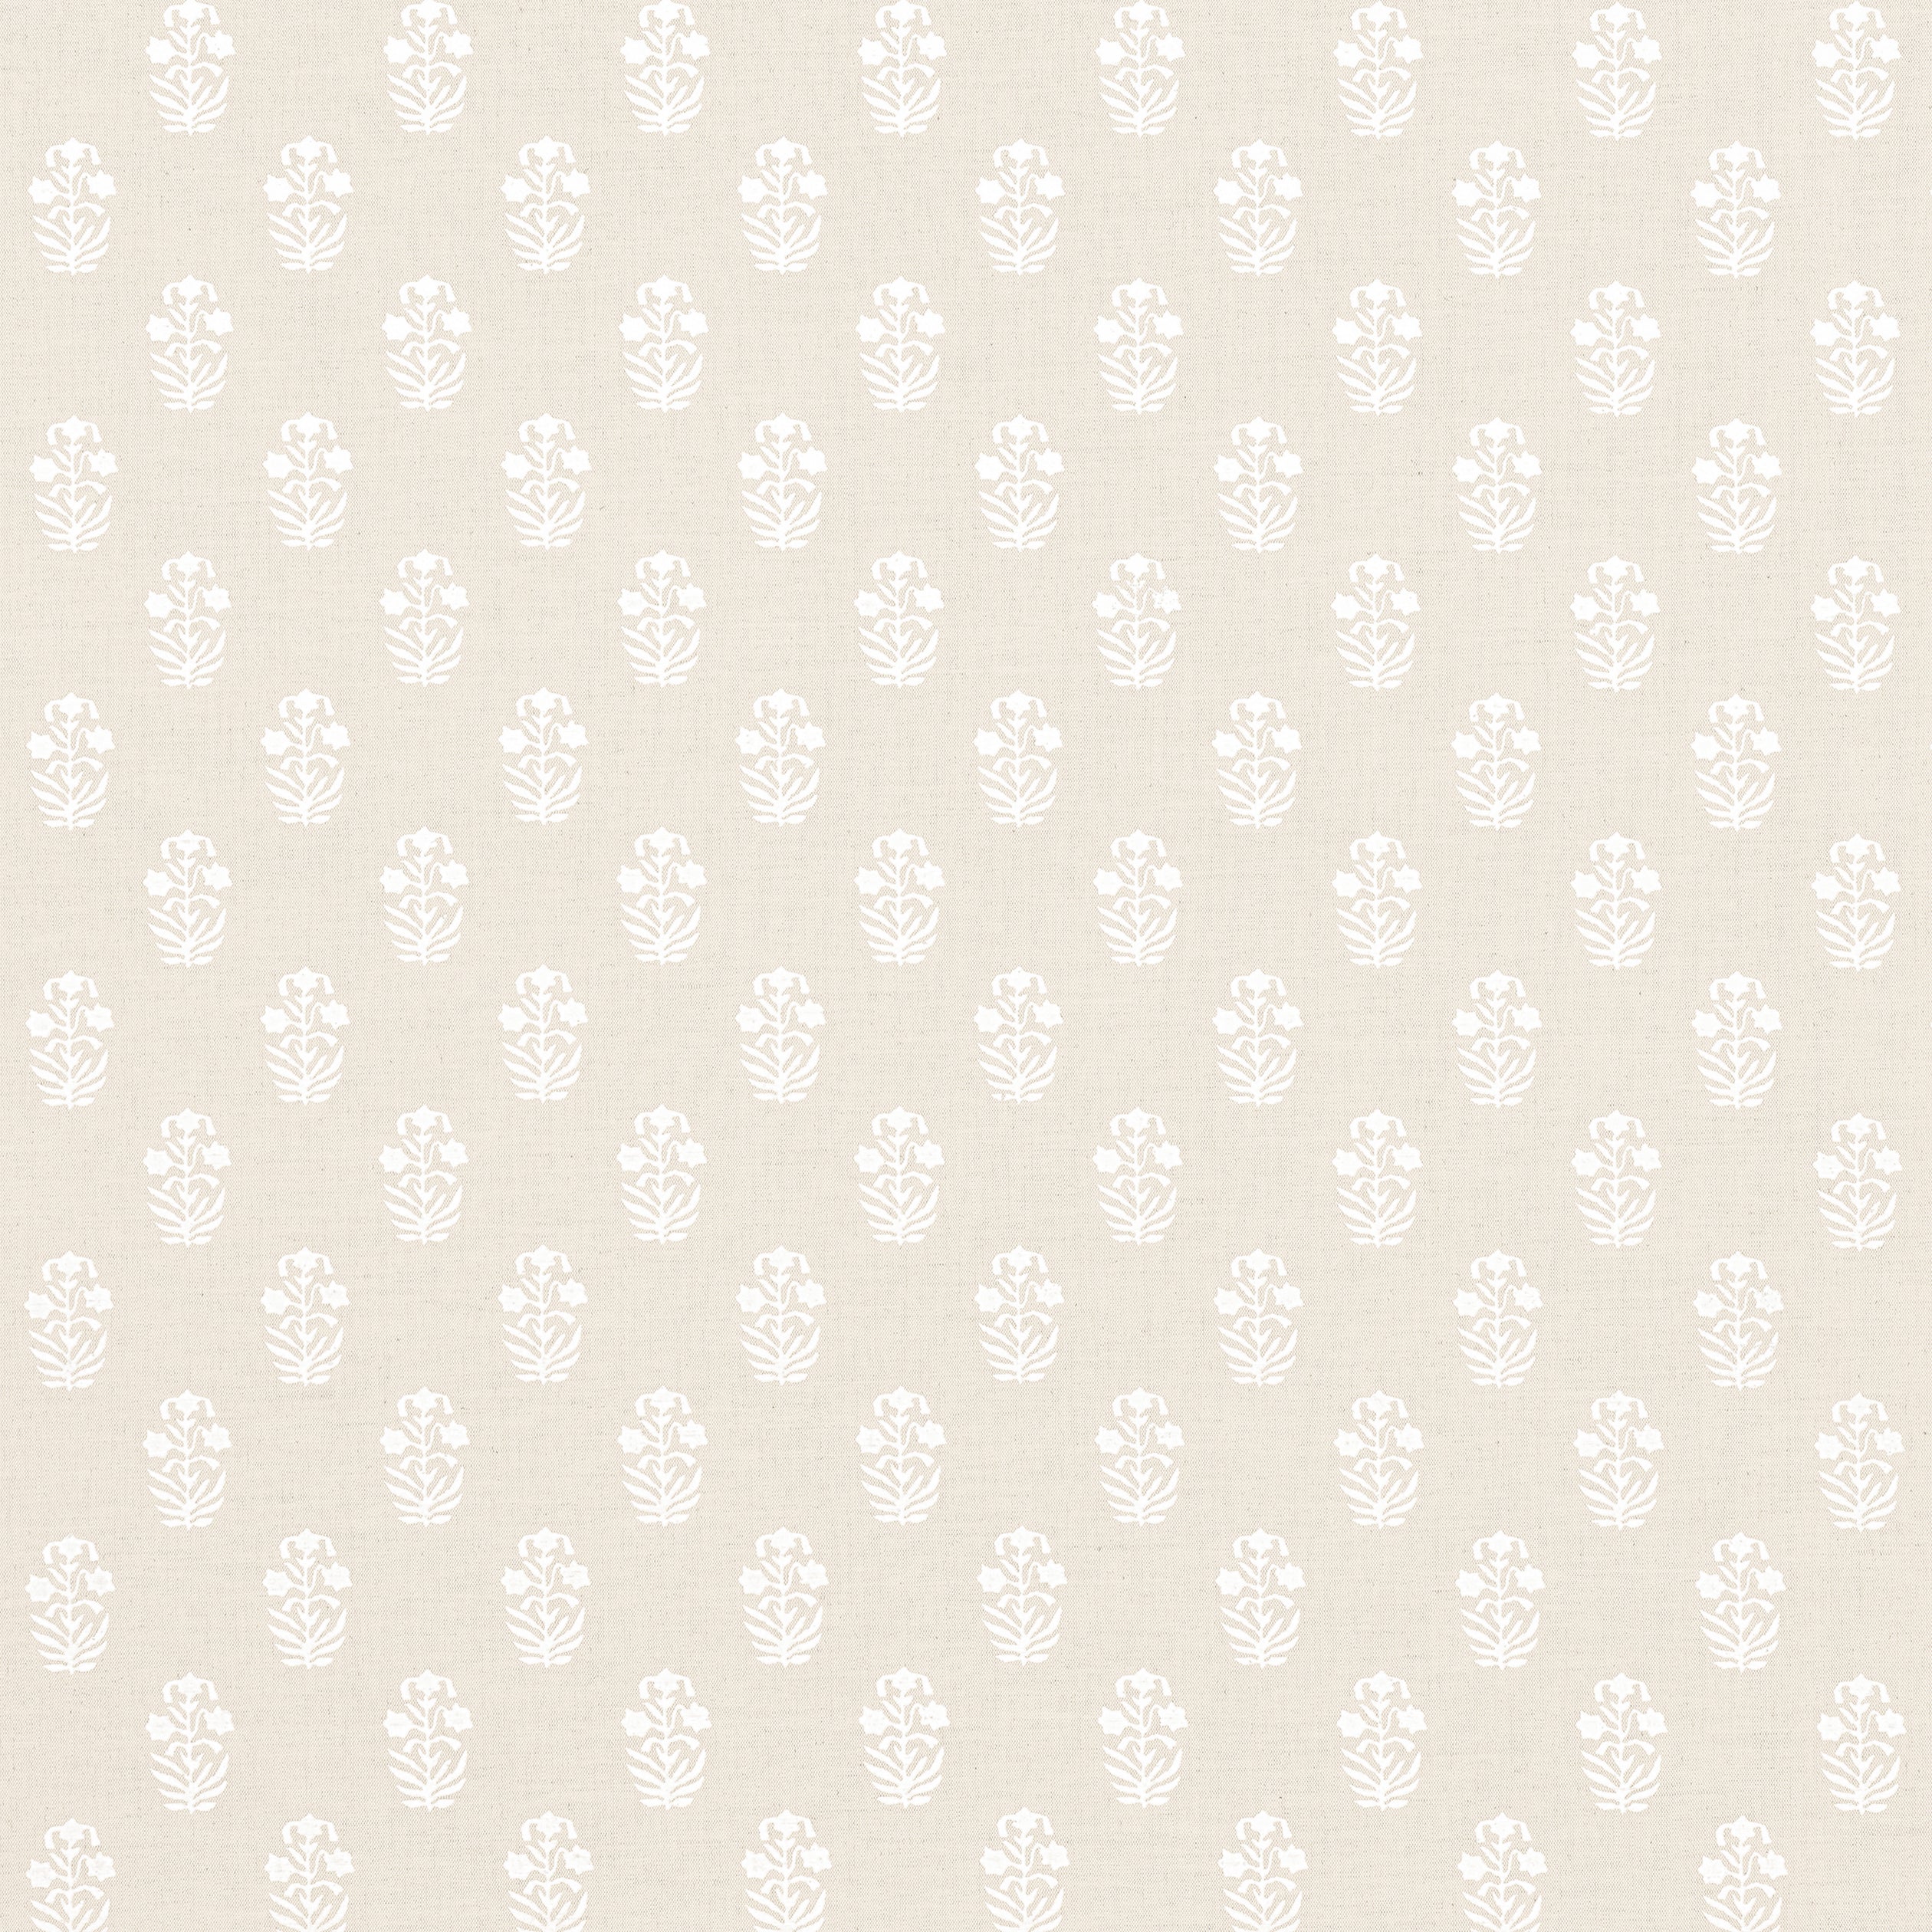 Corwin fabric in white on natural color - pattern number F936405 - by Thibaut in the Indienne collection